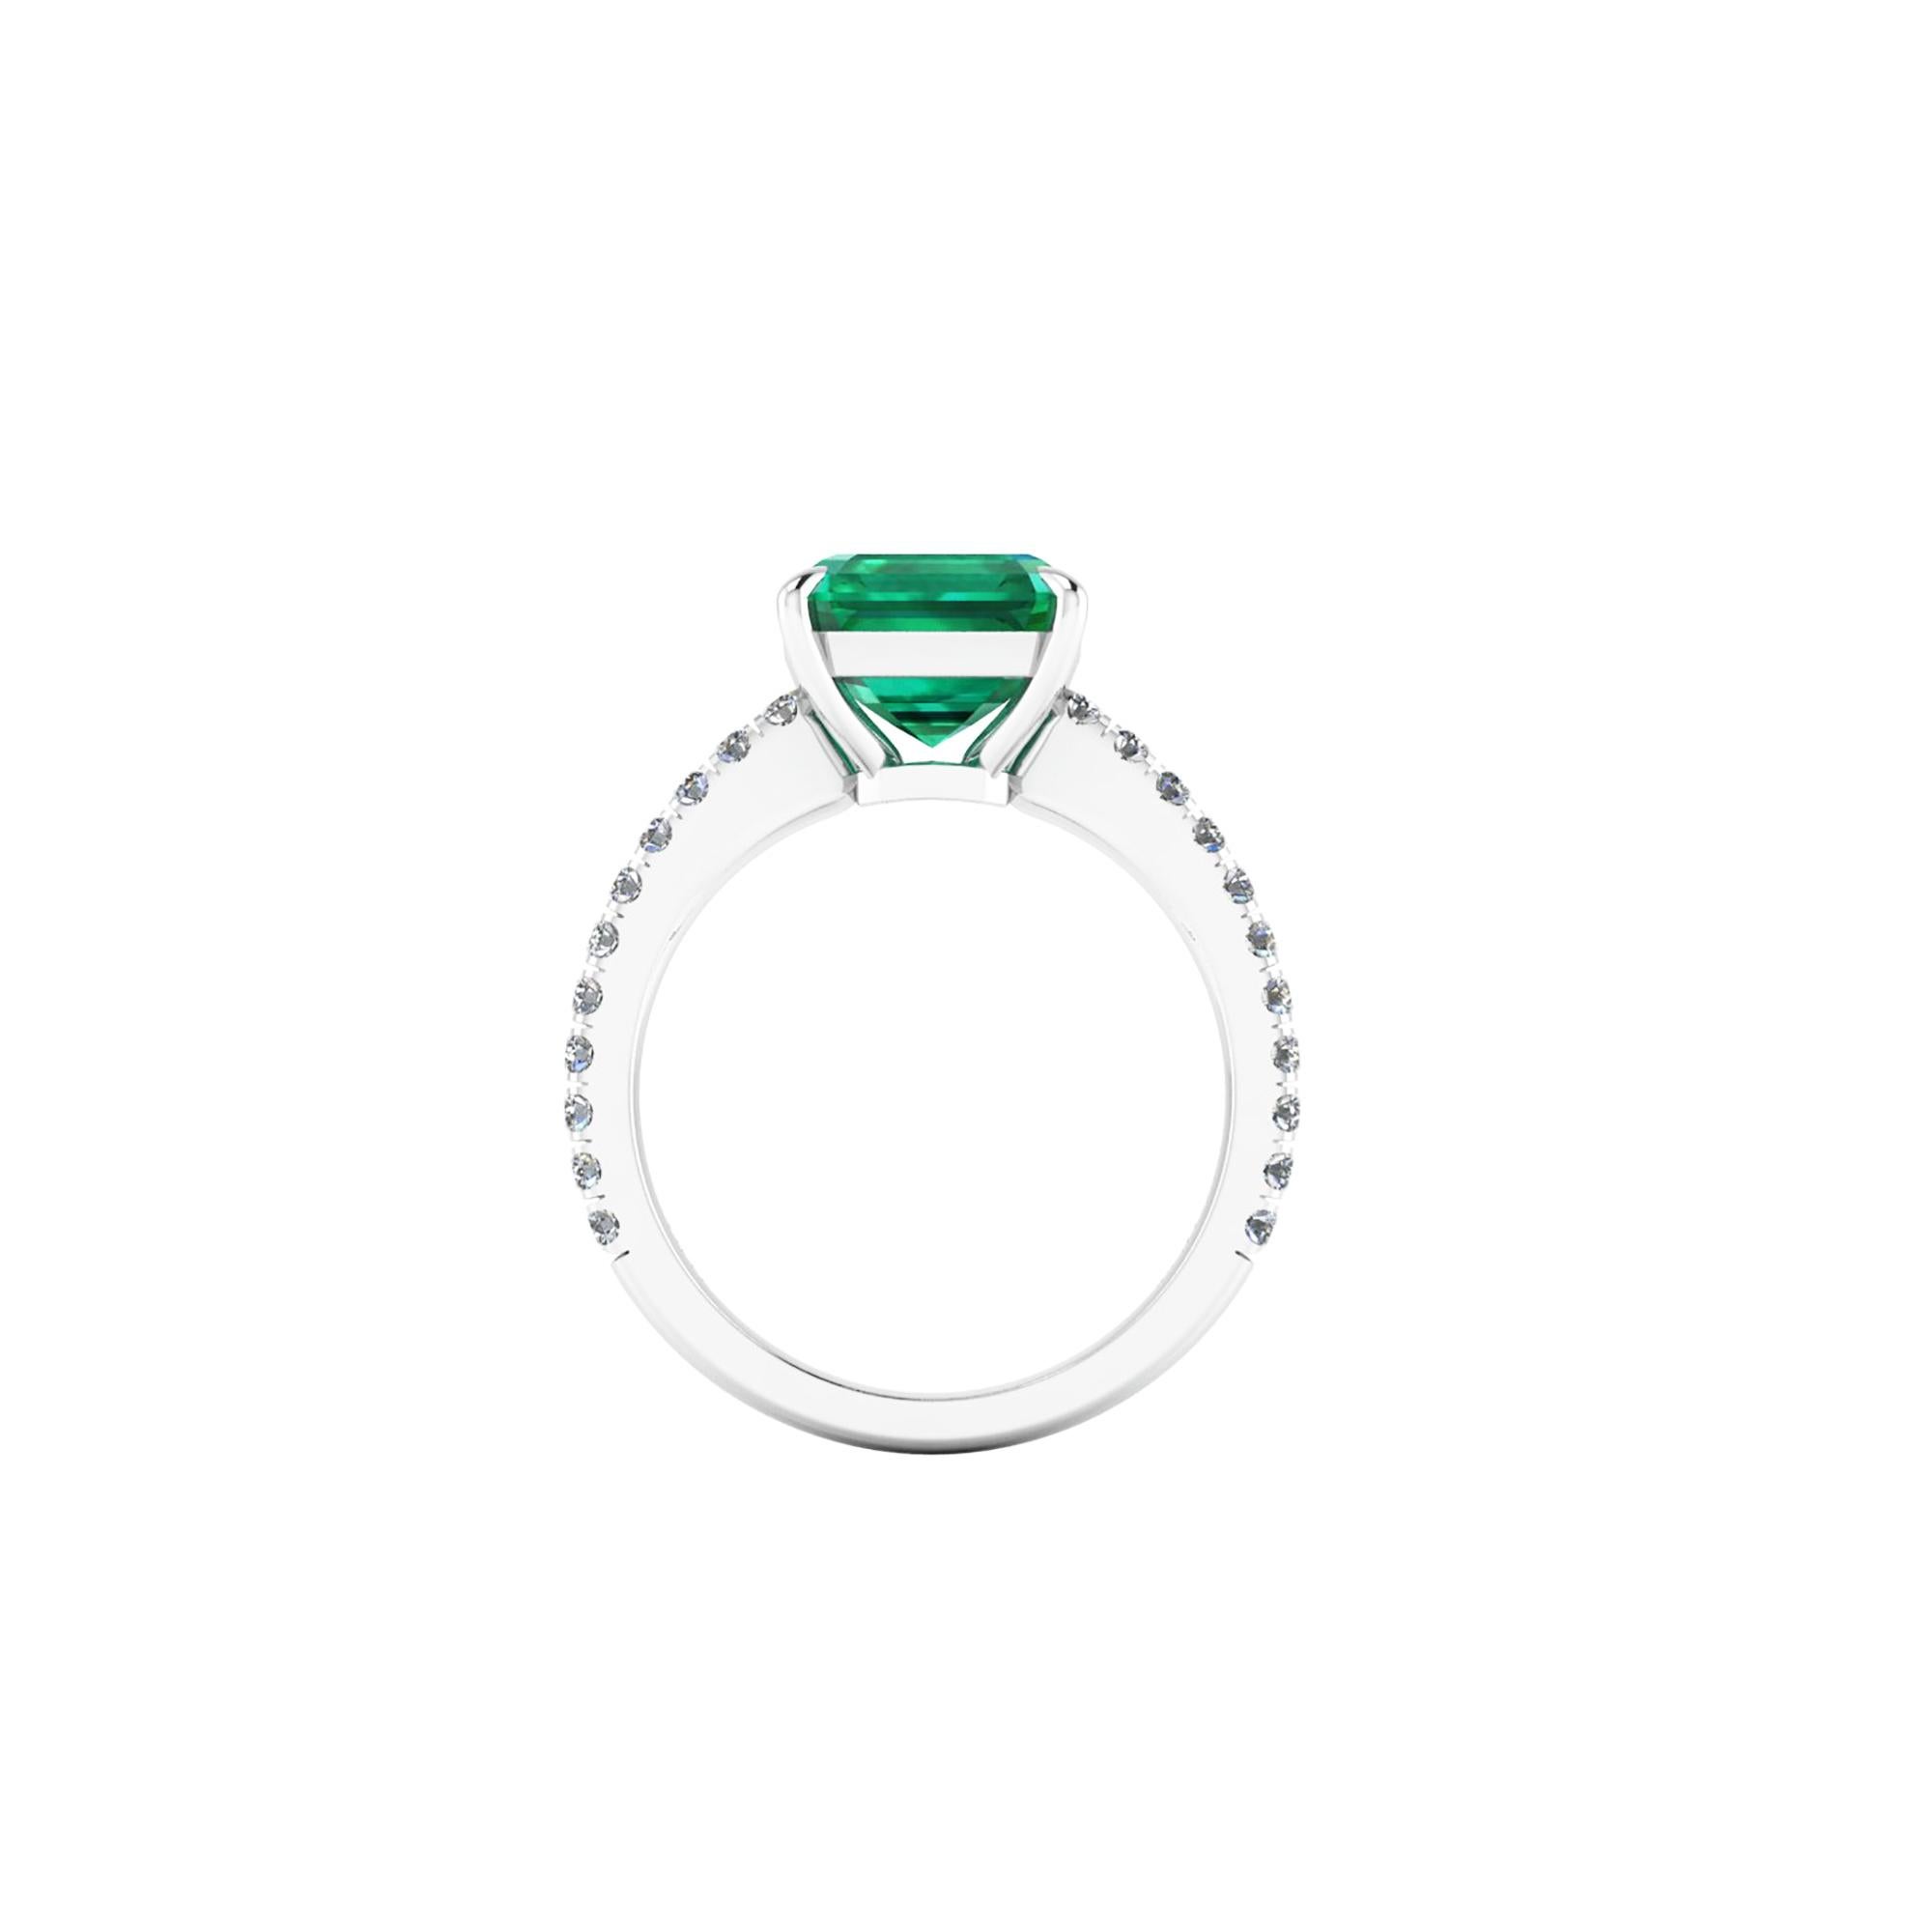 GIA Certified 3.13 carat Emerald cut Emerald, high quality color, eye clean gemstones, embellished by a pave' of bright diamonds of approximately  total carat weight of 0.32 carat, set in a hand crafted Platinum 950 ring, manufactured with the best